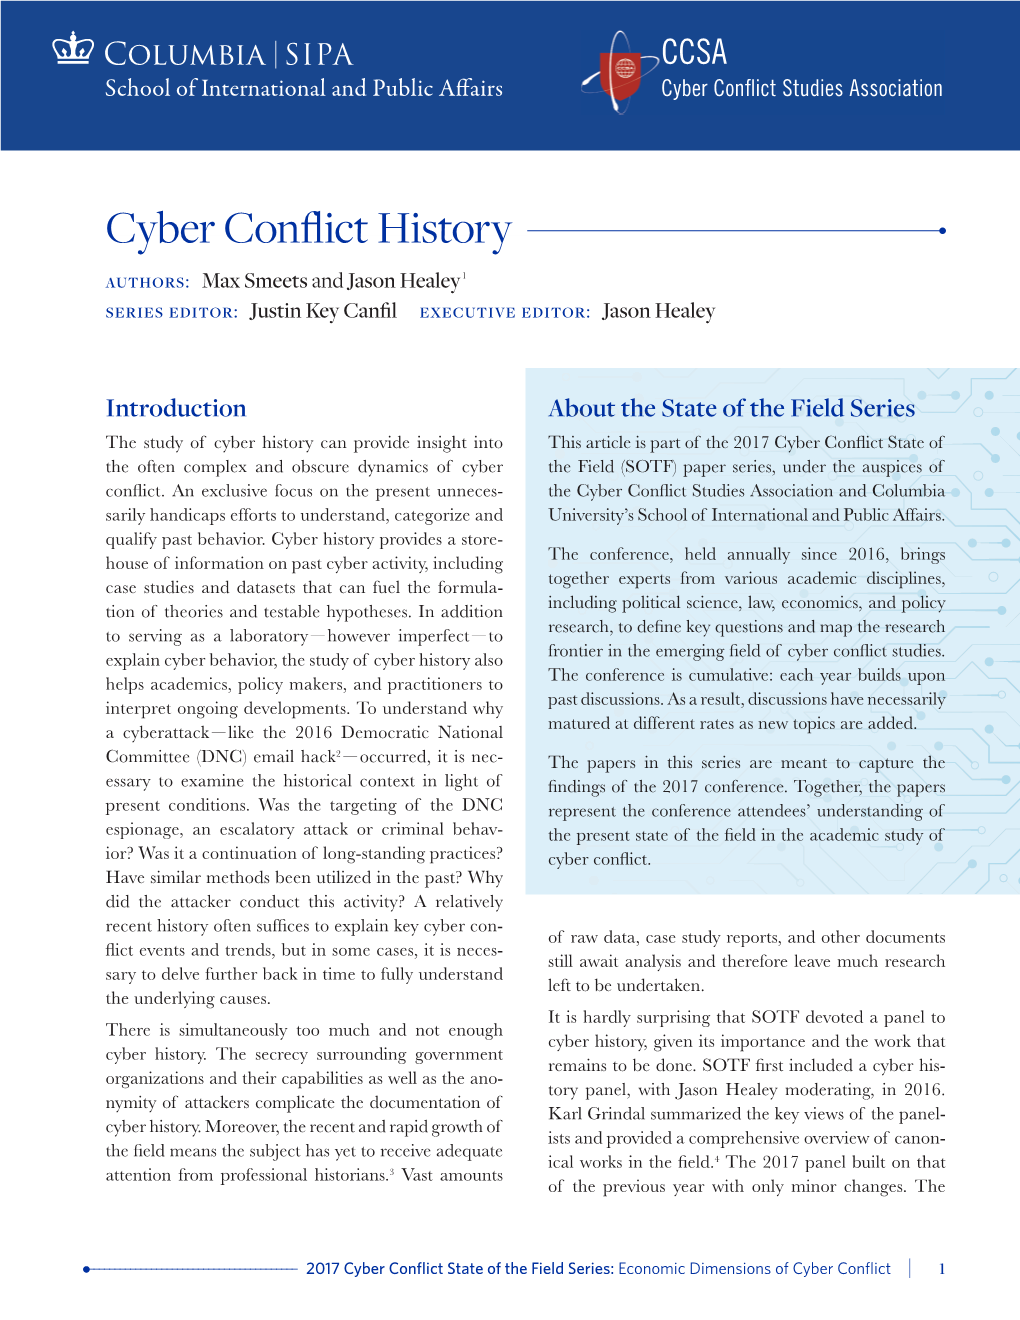 Cyber Conflict History Authors: Max Smeets and Jason Healey 1 Series Editor: Justin Key Canfil Executive Editor: Jason Healey